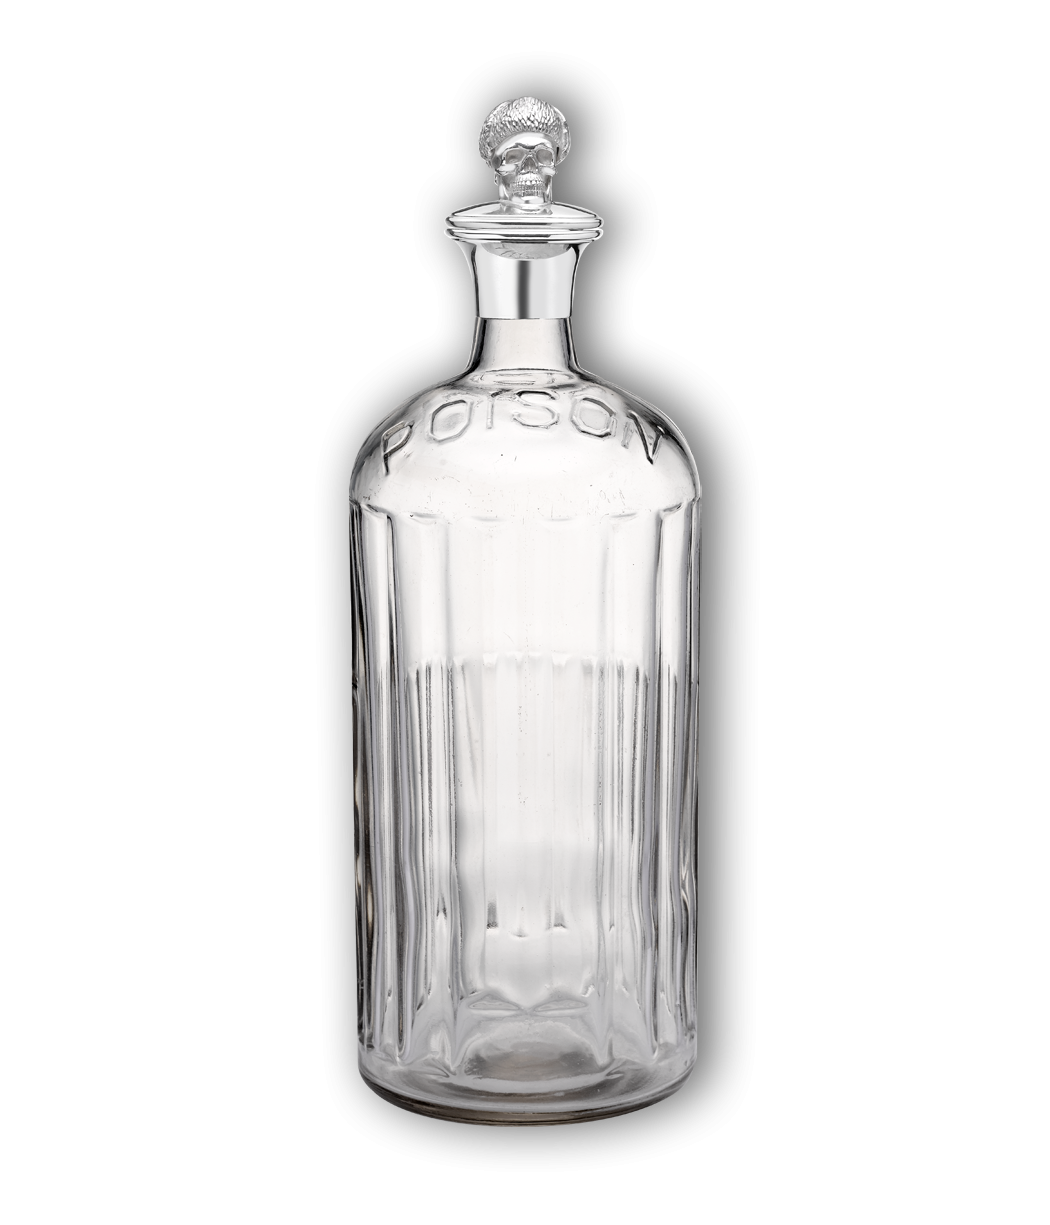 Glass bottle png. Image free download of